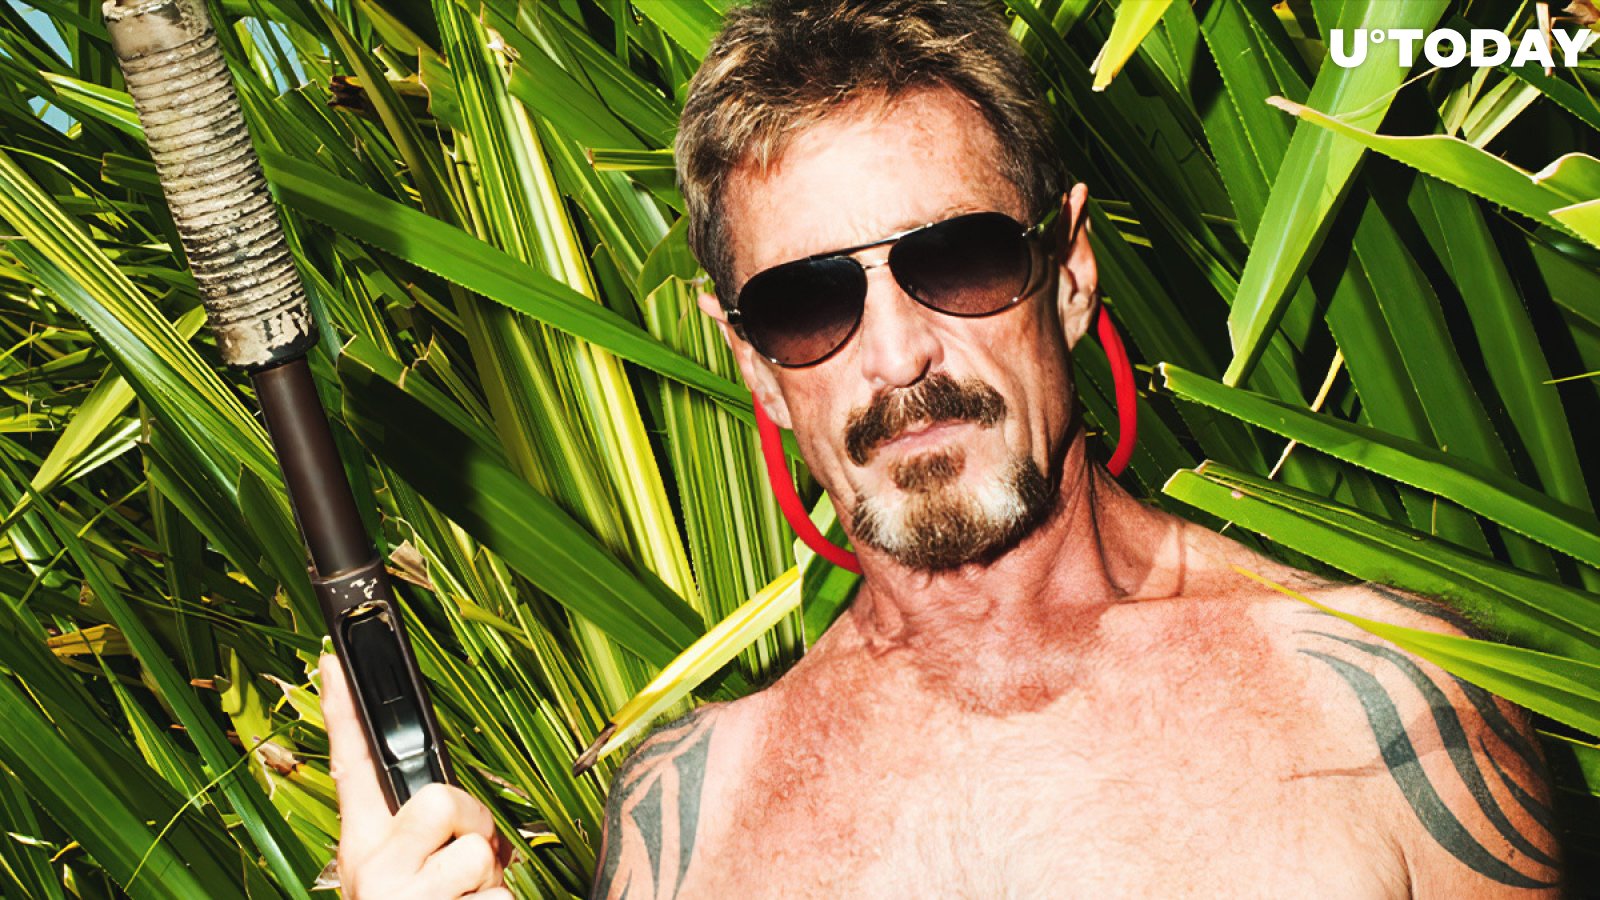 John McAfee Sends Joyful Message from Prison While U.Today Recalls His Crazy Adventures in Crypto World